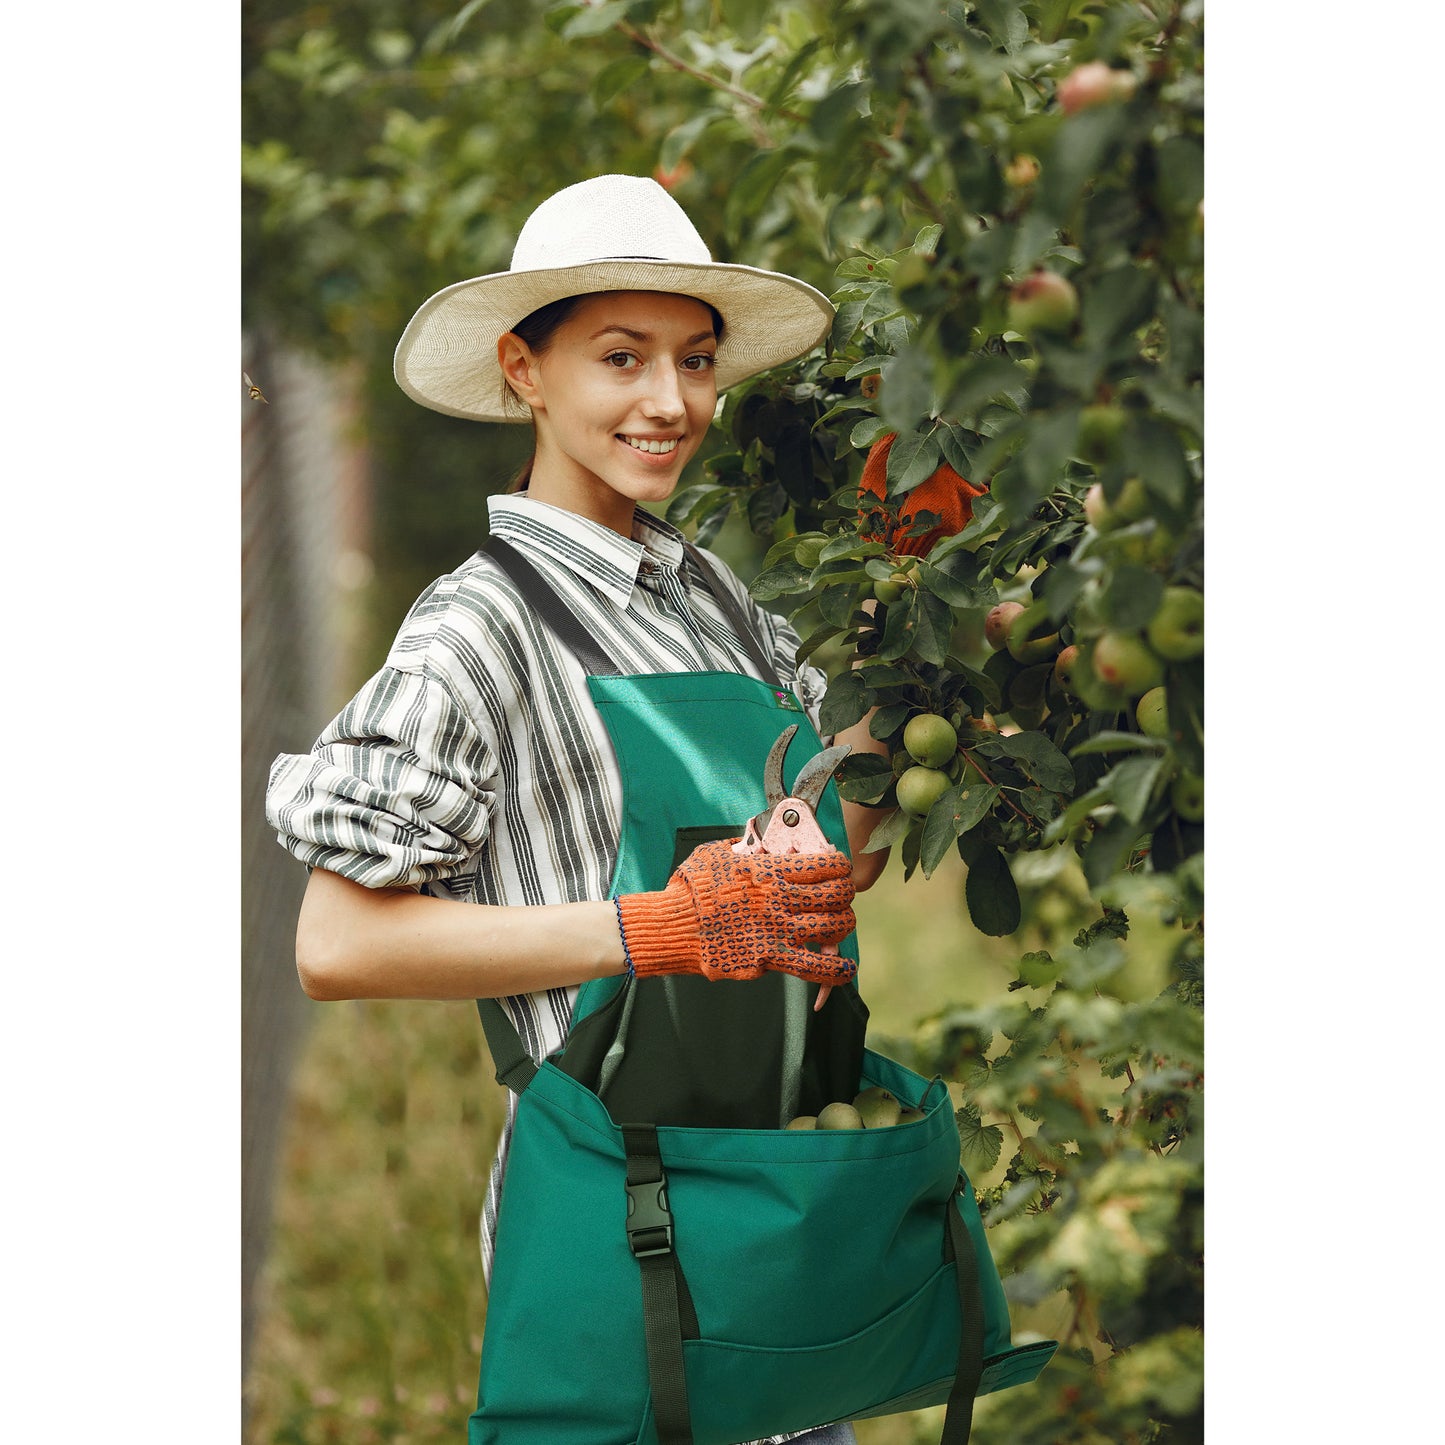 Kangaroo Apron for Gardener and Farmer with Pockets and Harvesting Pouch, Adjustable, Ergonomic